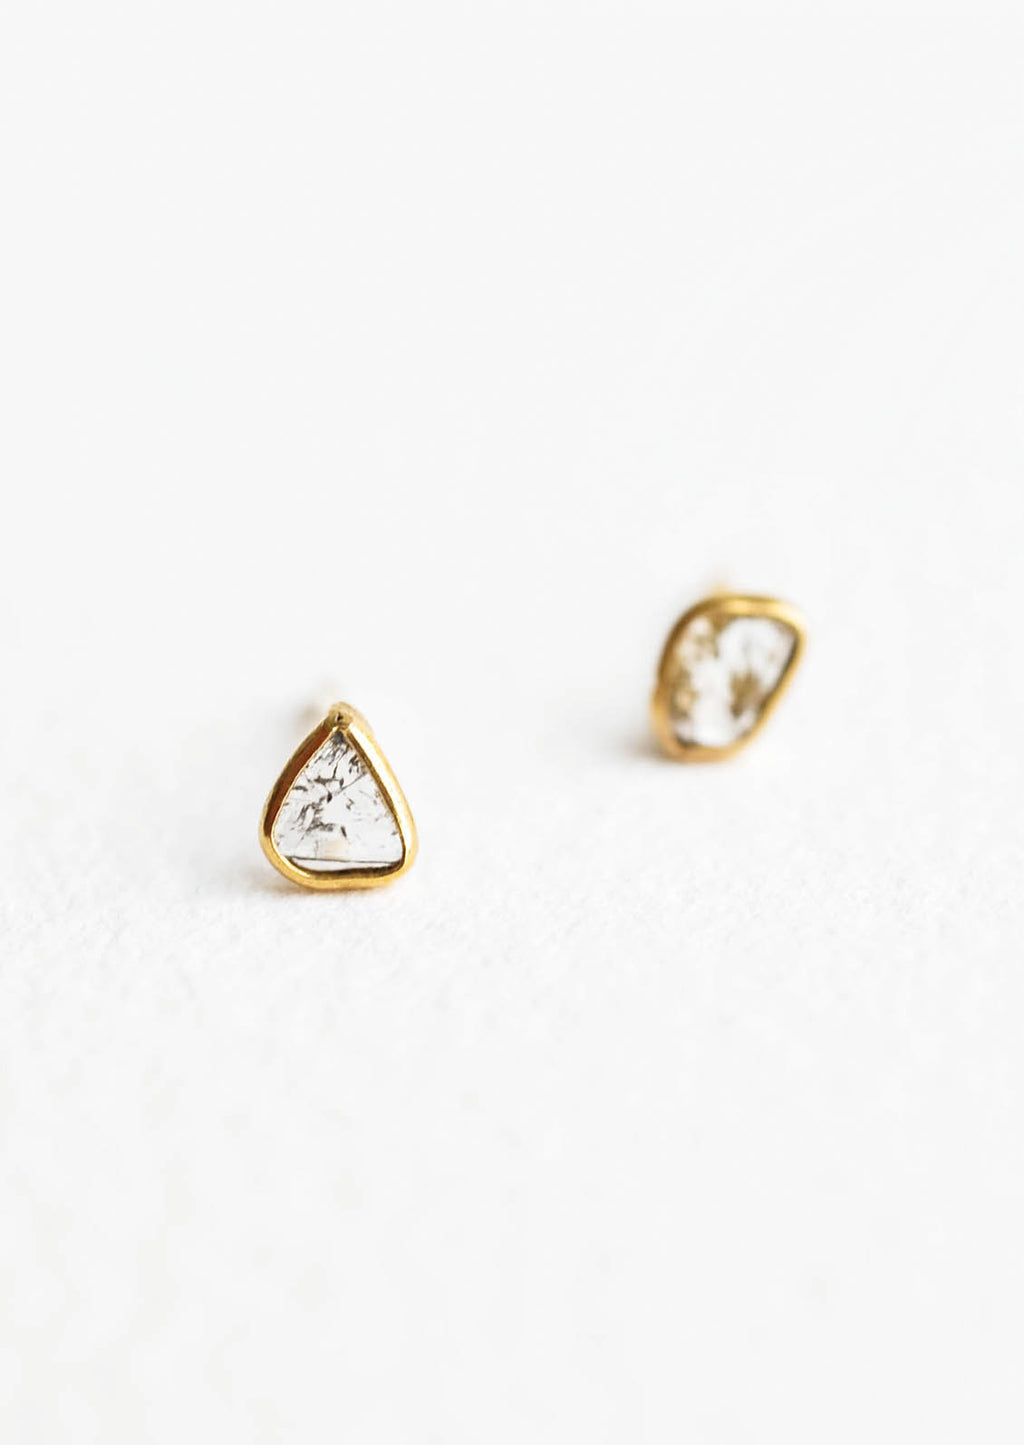 2: Organically shaped stud earrings with small diamond slice surrounded by brass metal trim